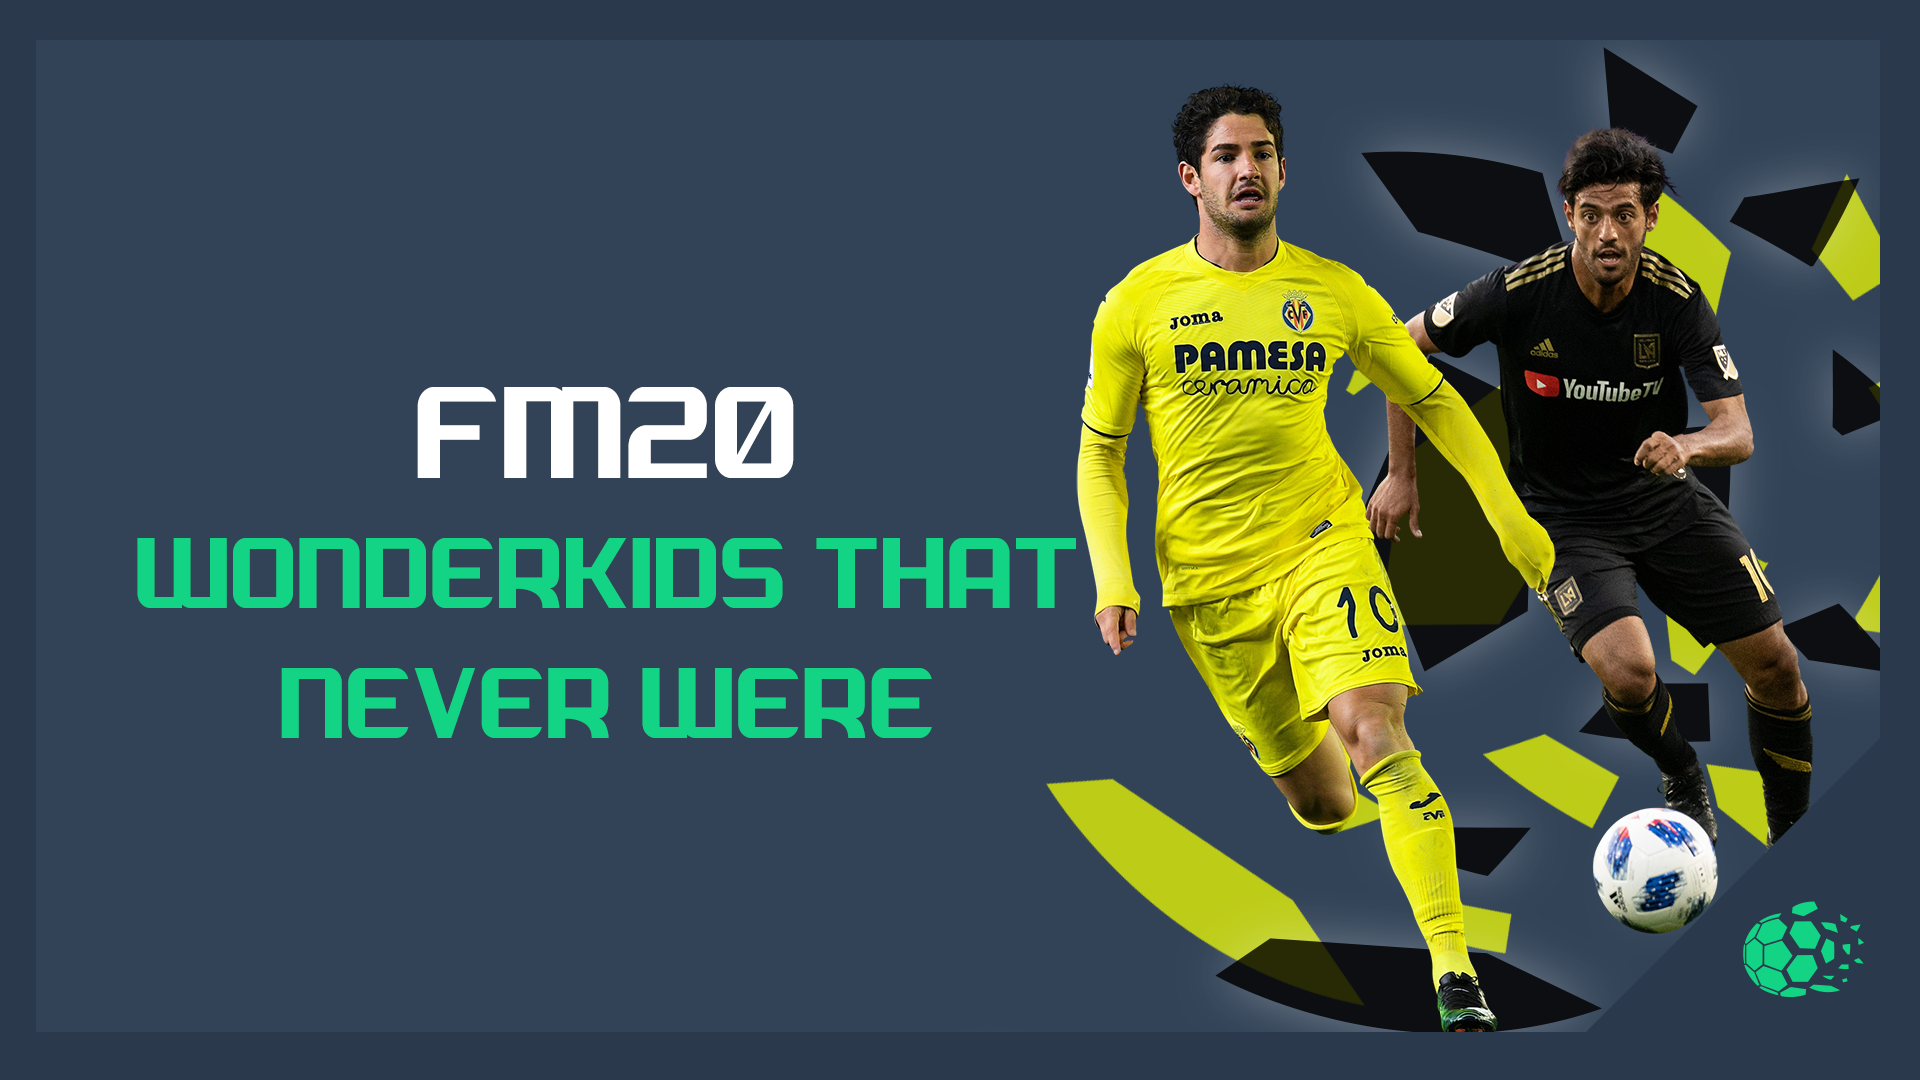 FM20 Football Manager: The Wonderkids That Never Were